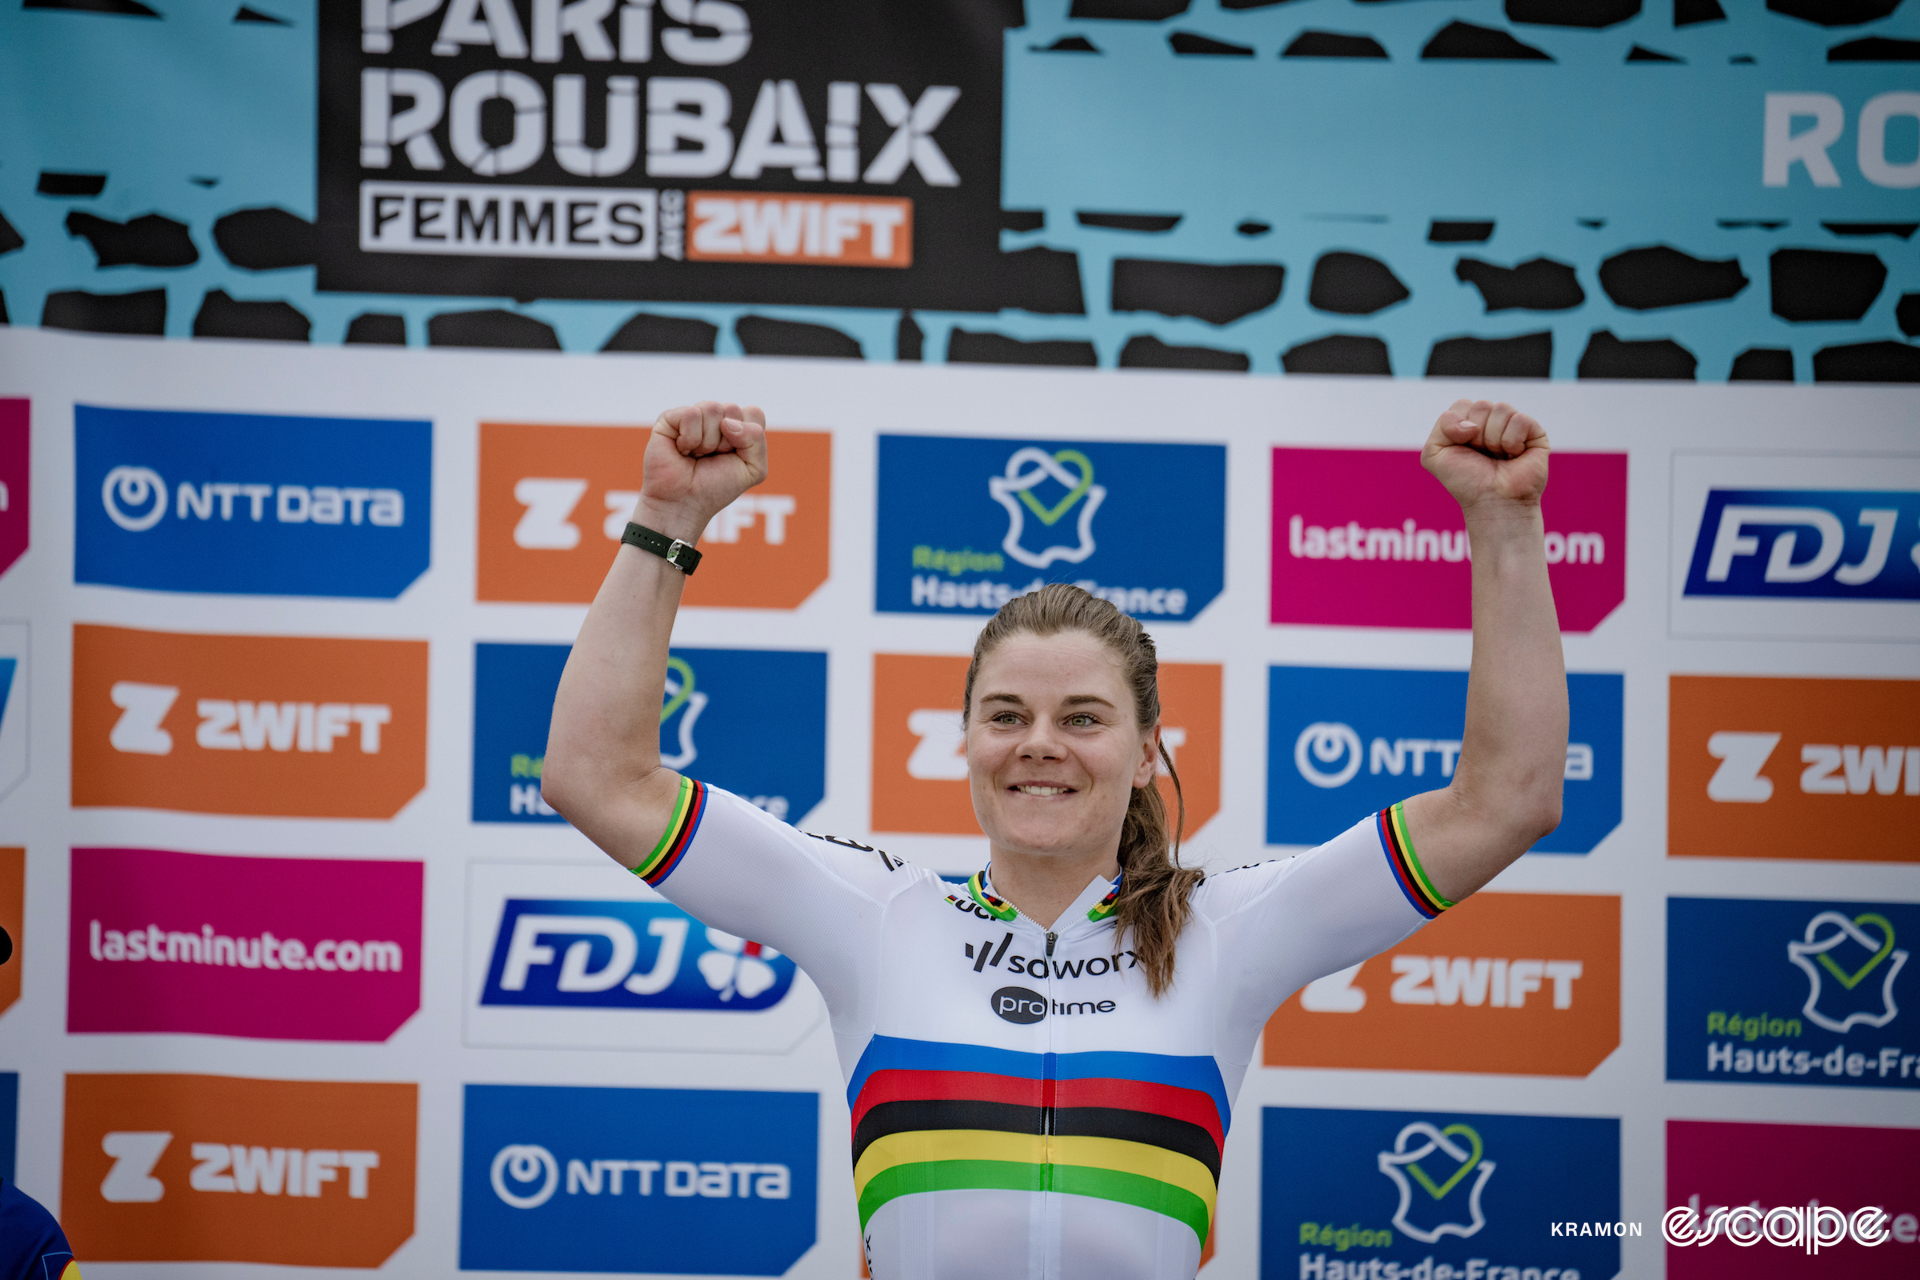 A woman raises her arms in triumph on the podium of a bike race